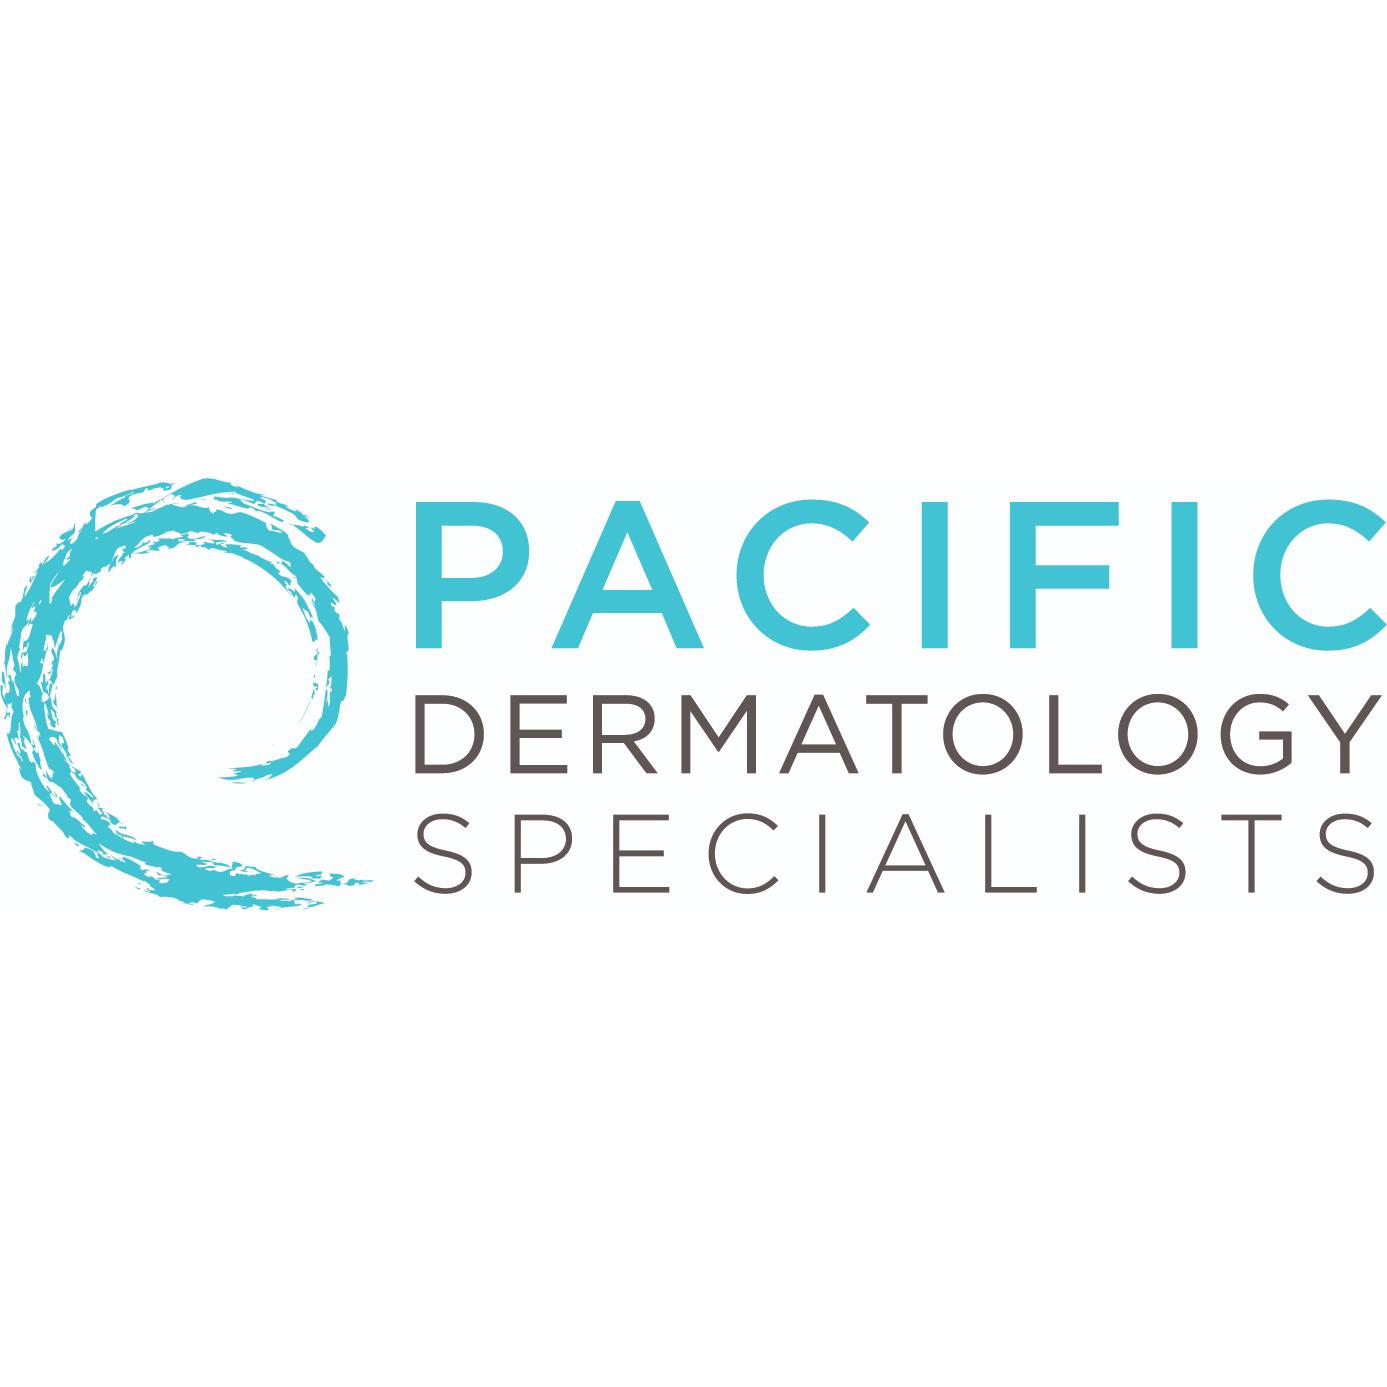 Pacific Dermatology Specialists - Downey, CA 90241 - (562)923-6450 | ShowMeLocal.com